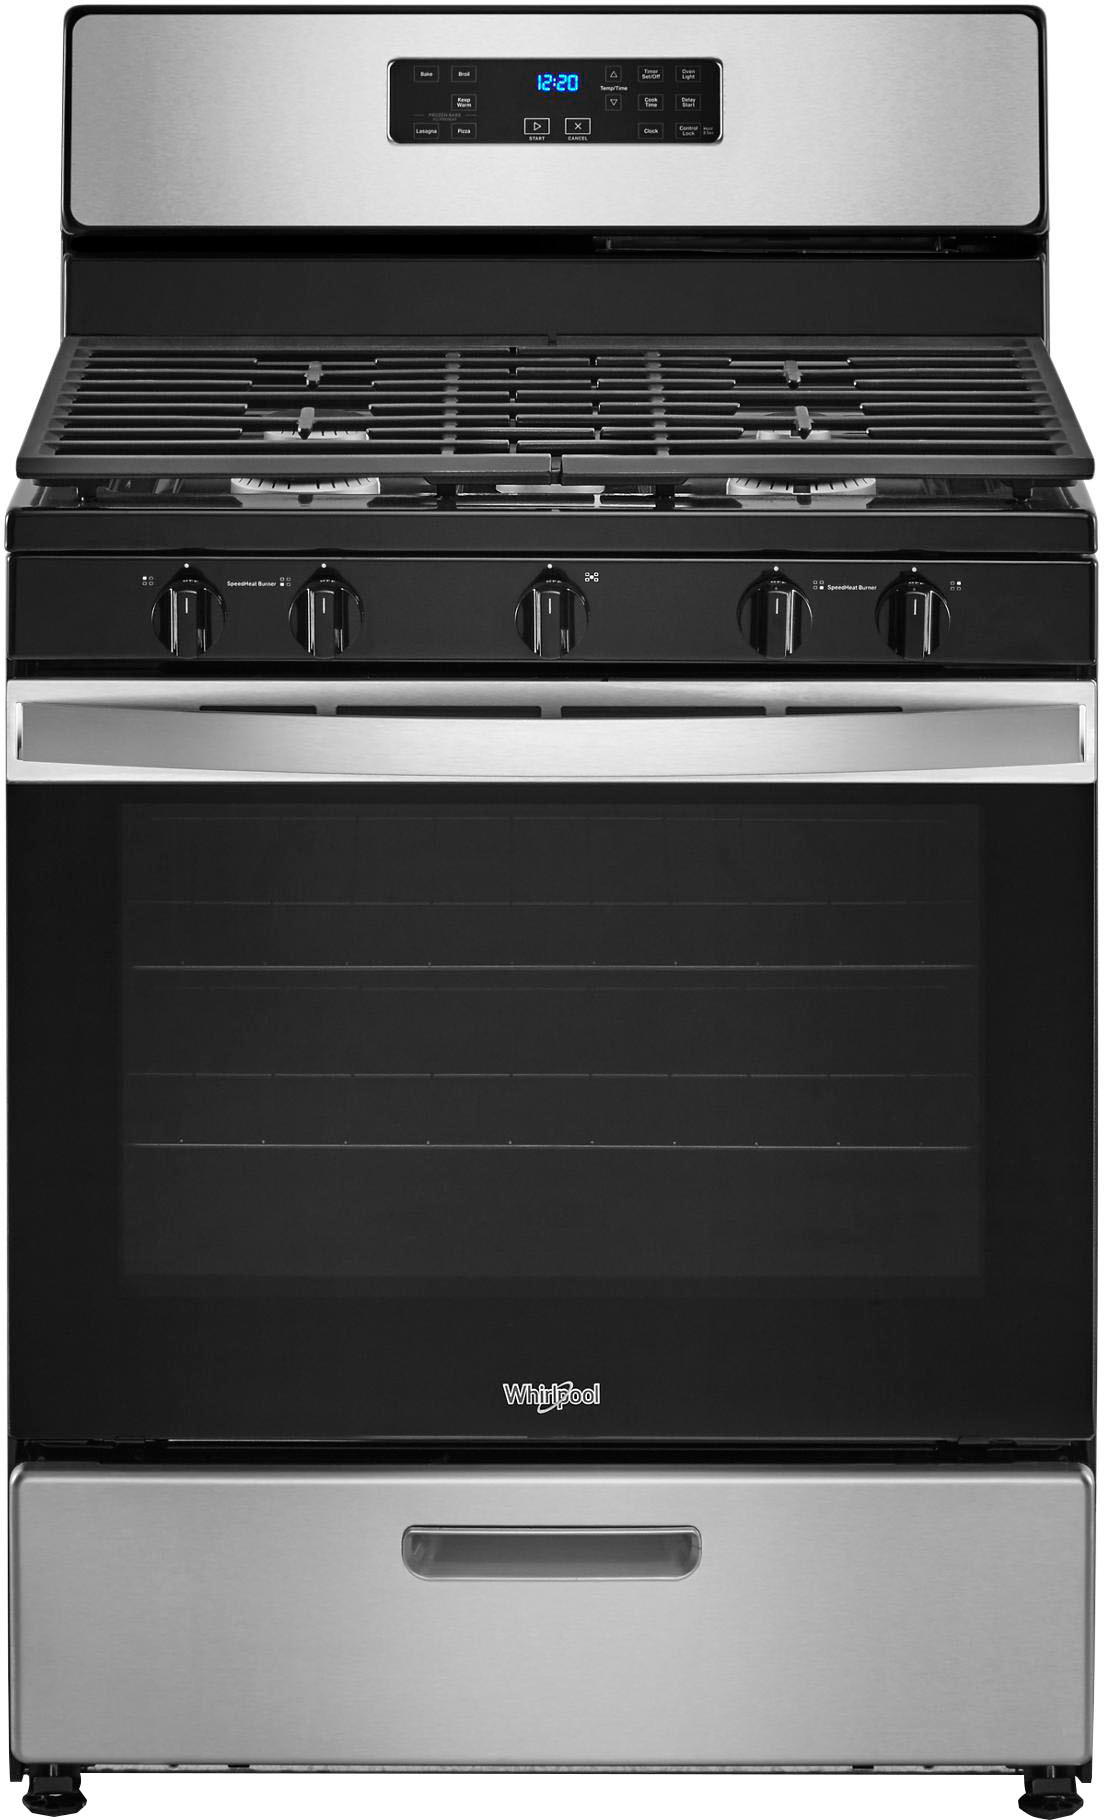 Whirlpool 5.1 Cu. Ft. Freestanding Gas Range with Edge to Edge Cooktop  Stainless Steel WFG505M0MS - Best Buy